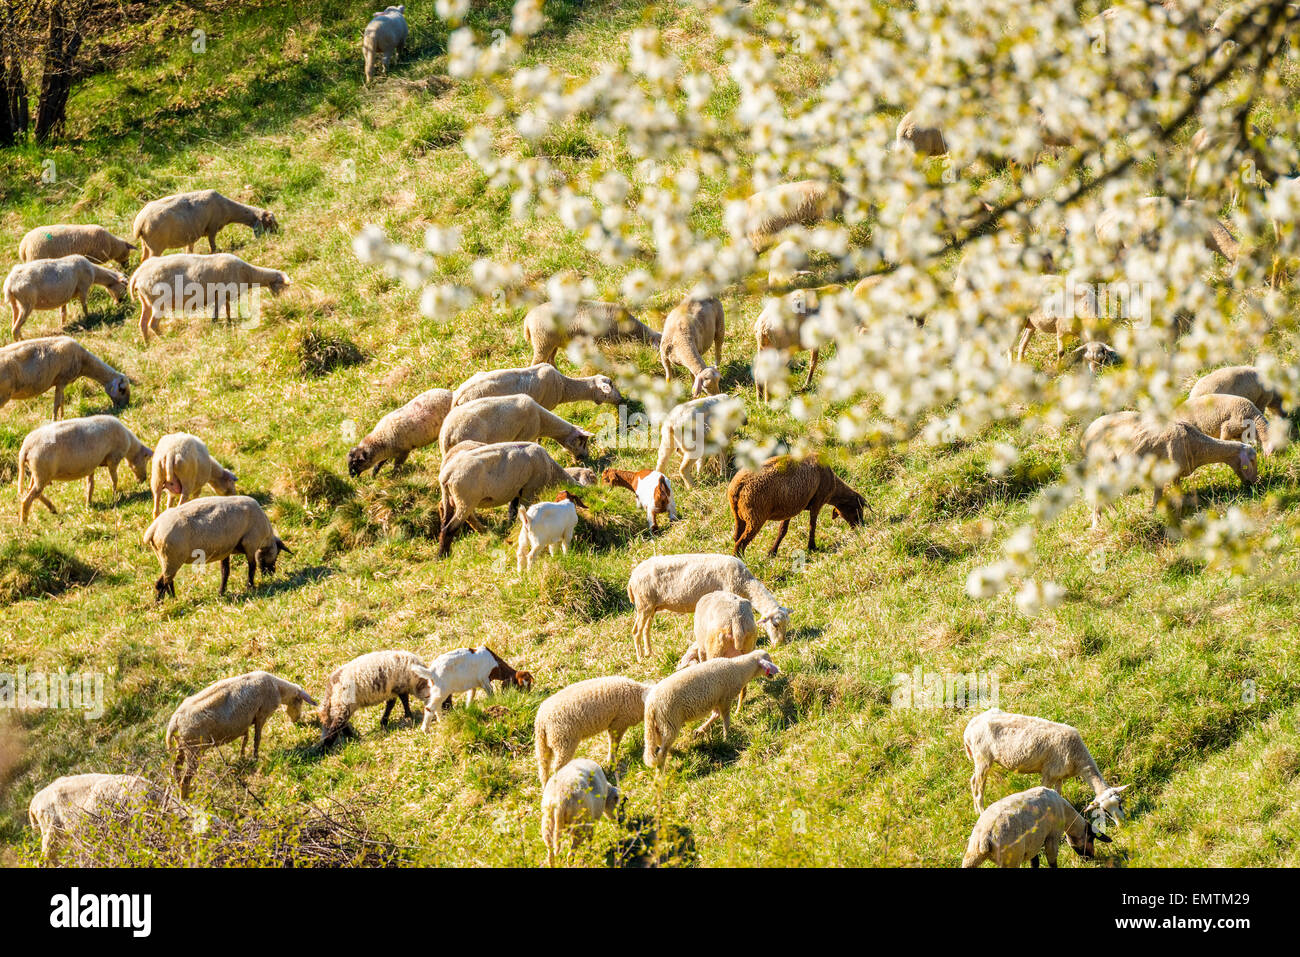 Sheep lambs, goats in the spring they graze on the hillside, juradistl lamb bavaria europe Germany natural nature healthy best m Stock Photo